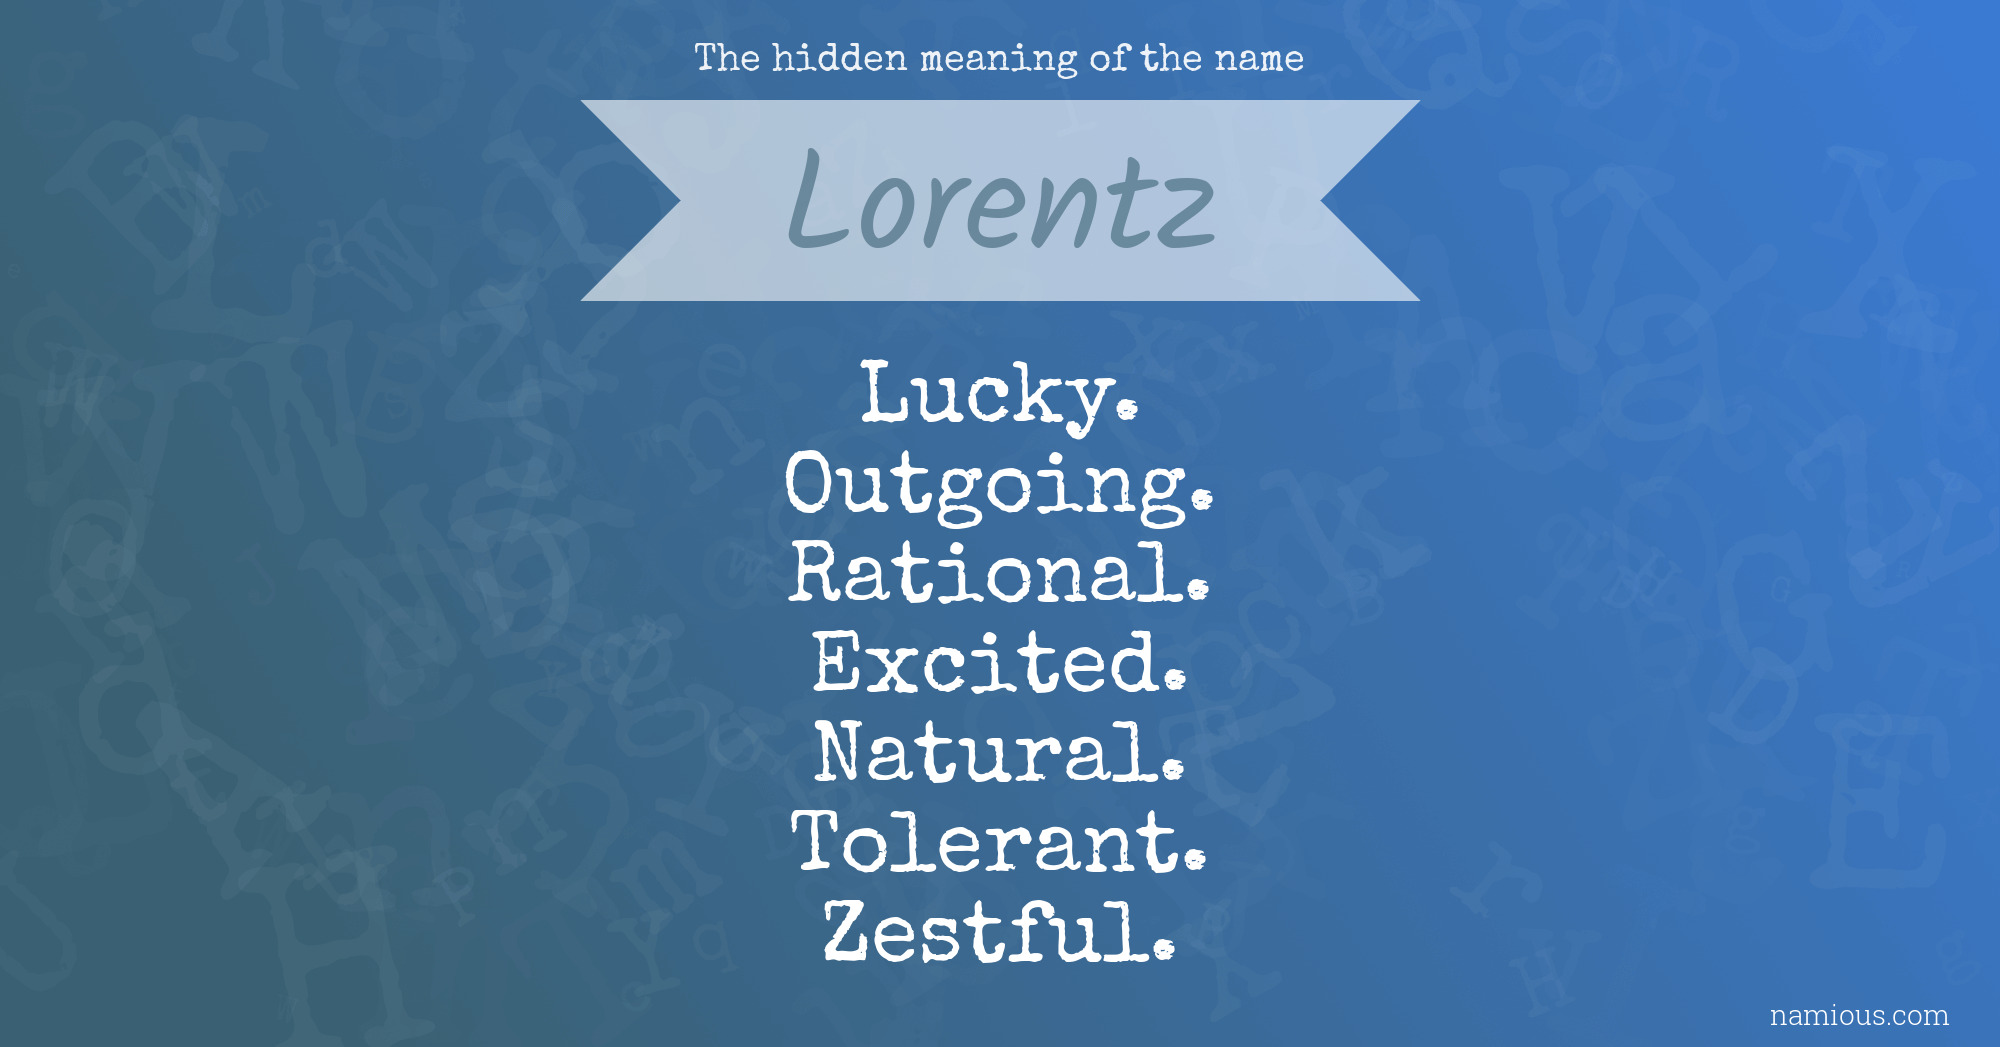 The hidden meaning of the name Lorentz